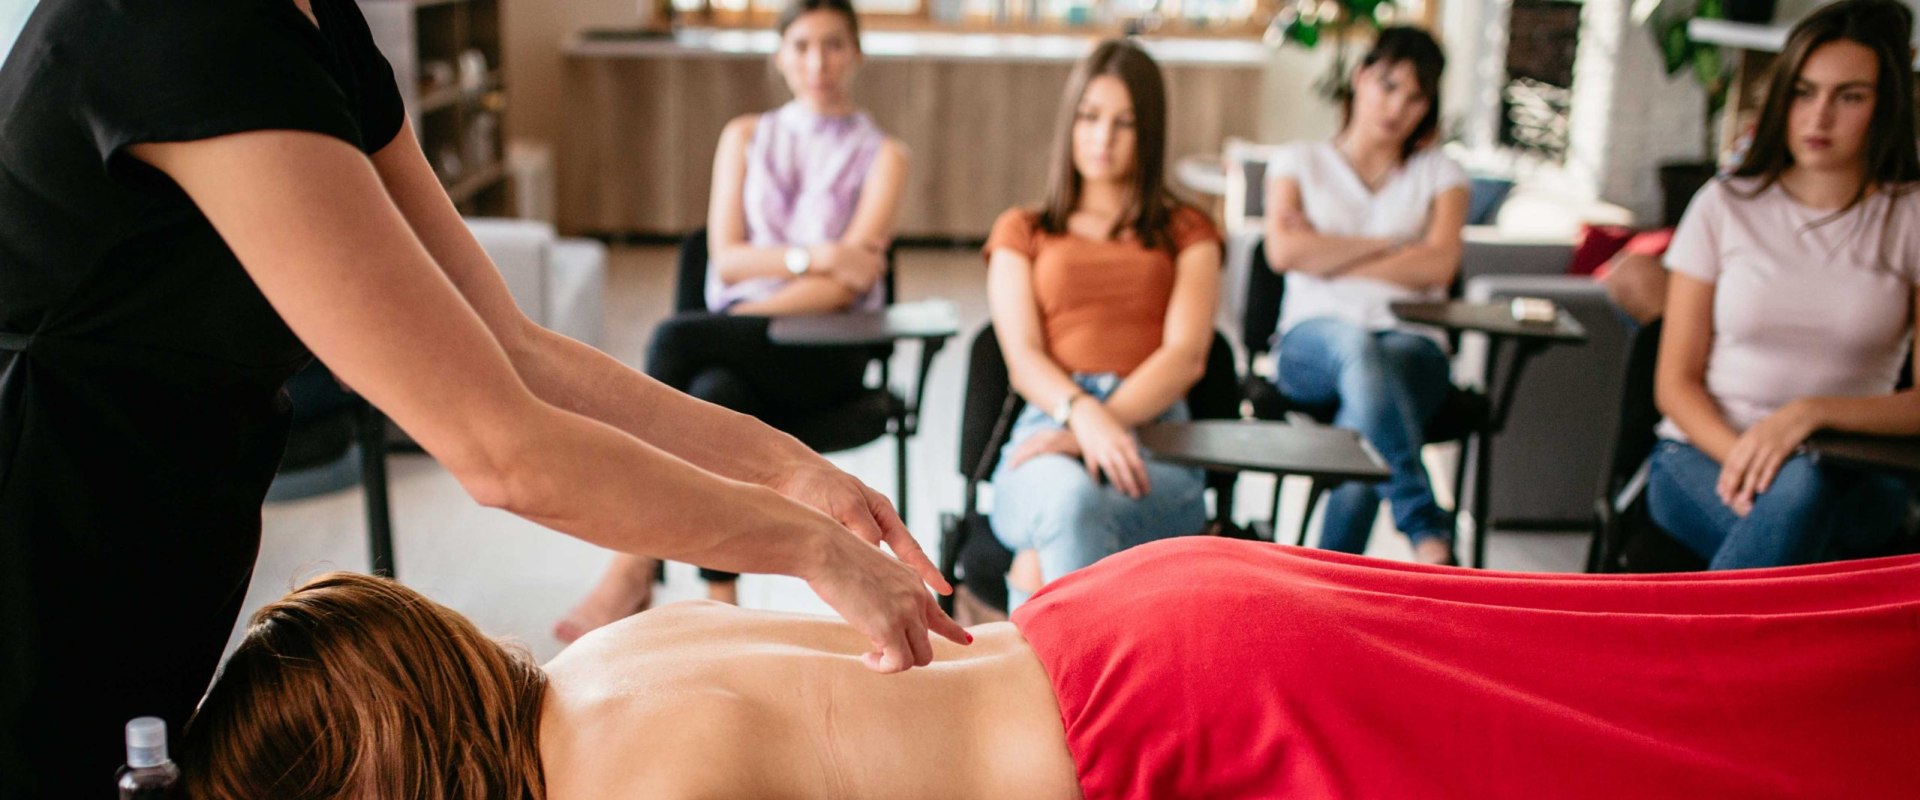 How long is massage therapy school?